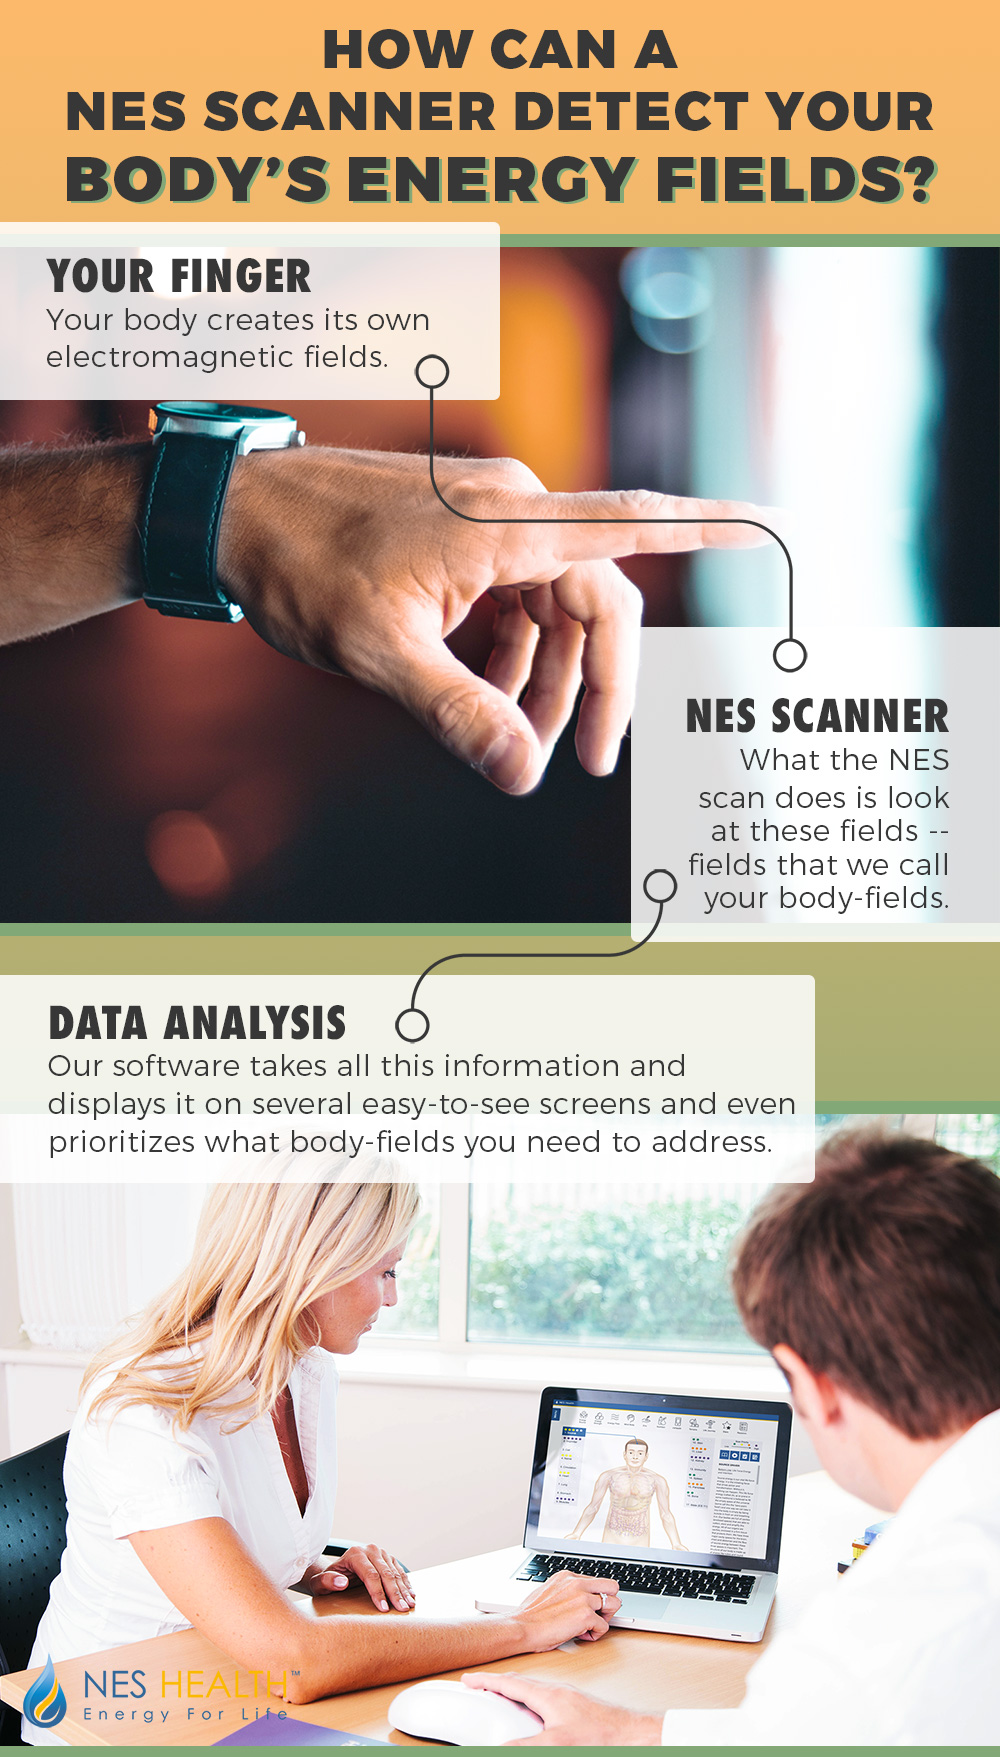 Nes-scanner-detect-body-field-infographic